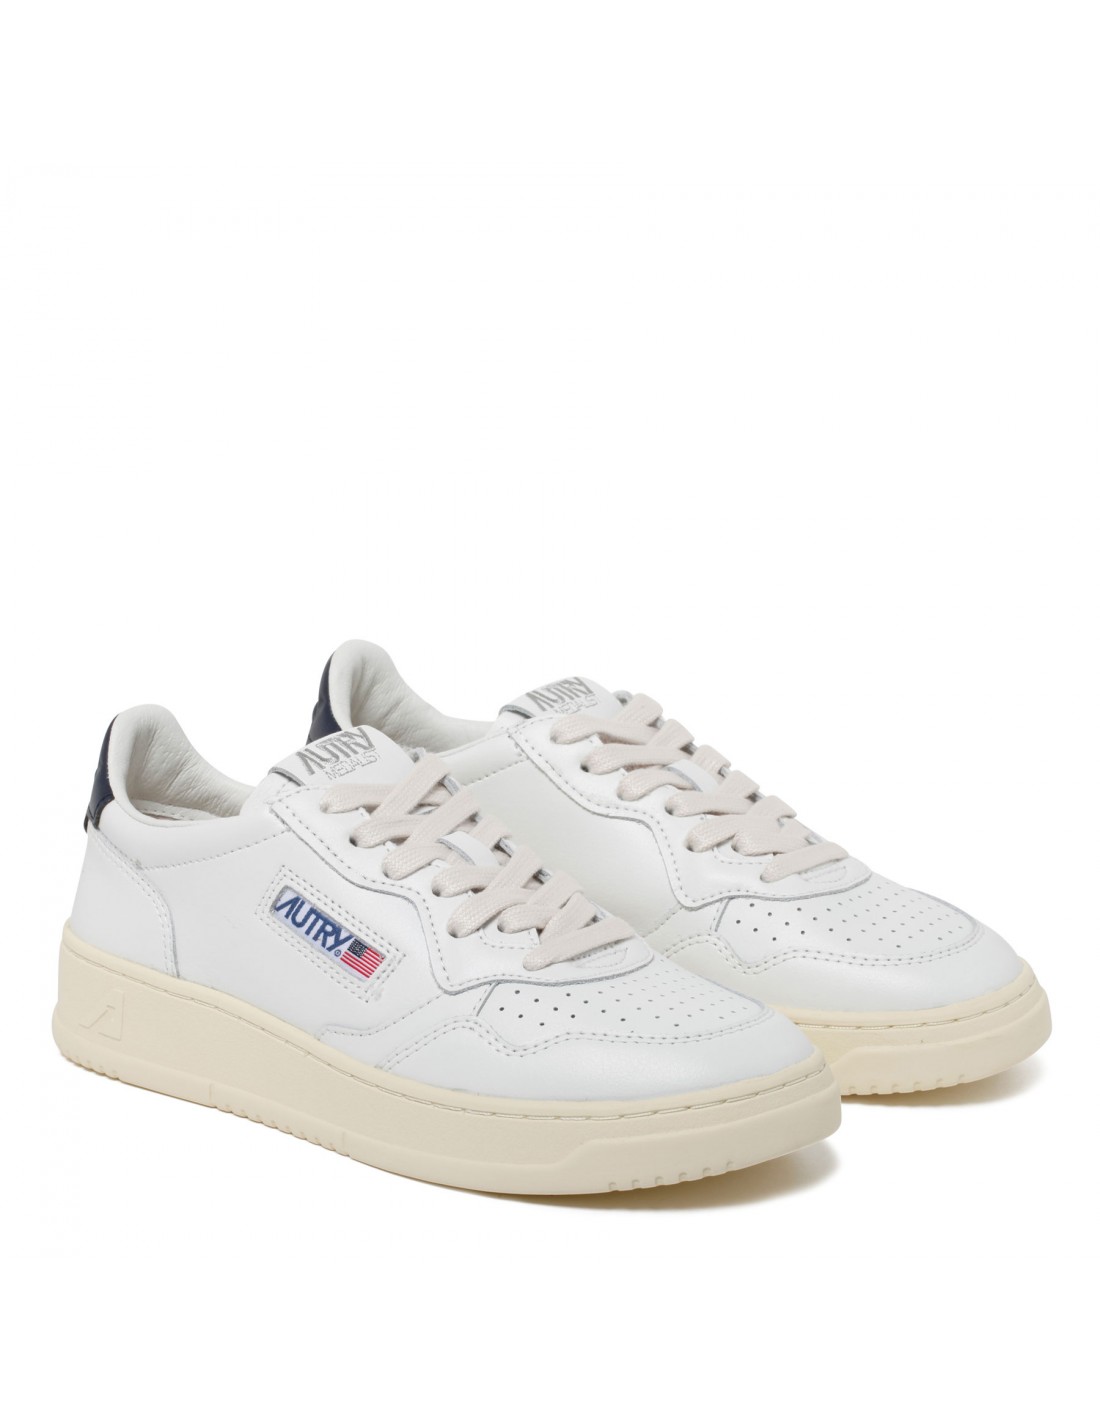 01 white and blue leather sneakers